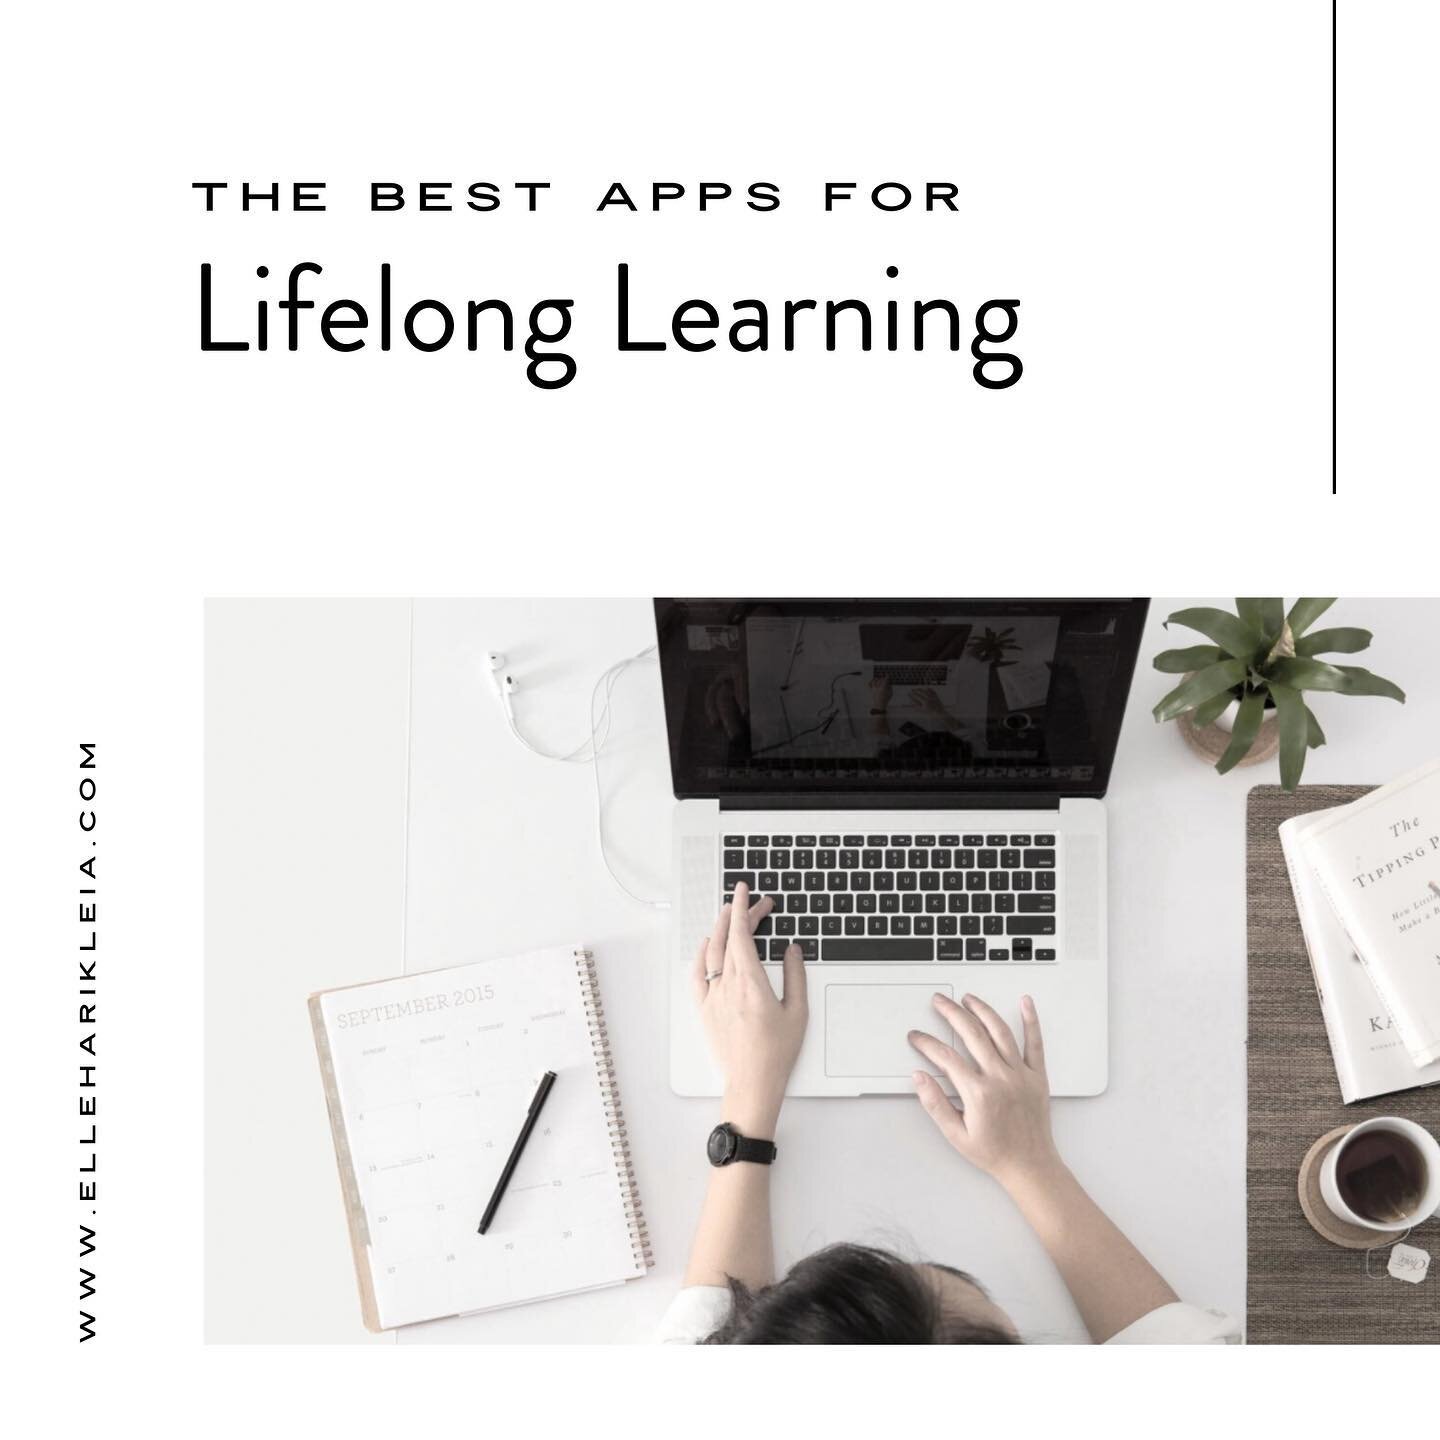 I'm a big fan of lifelong learning. It's the thing that gives us the greatest insurance policy in our careers as the economy changes and employers demand new skills and talents across all industries. 

But finding the time and money to invest in your